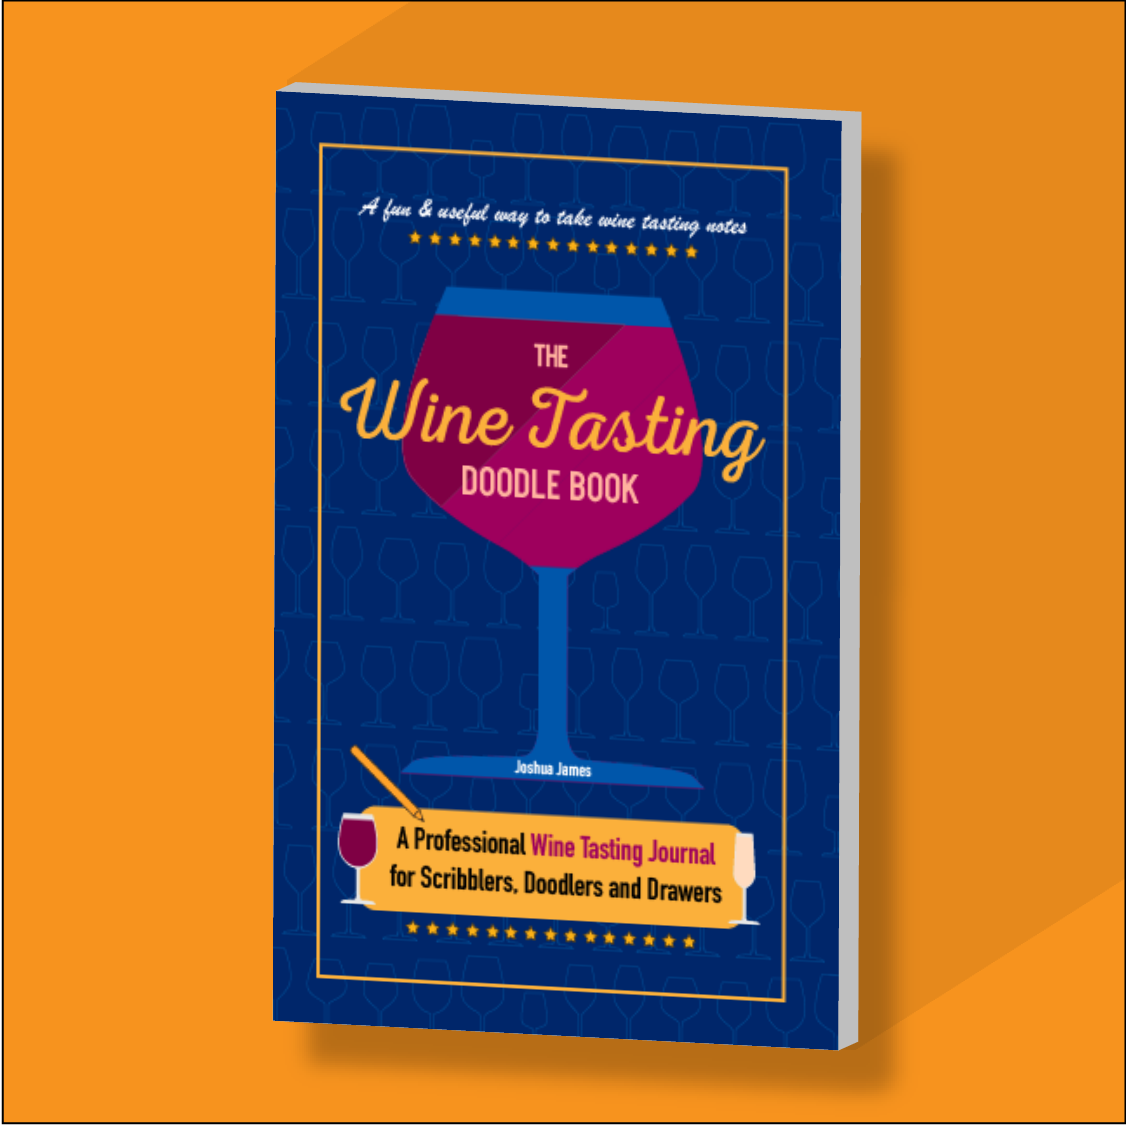 The Wine Tasting Doodle Book